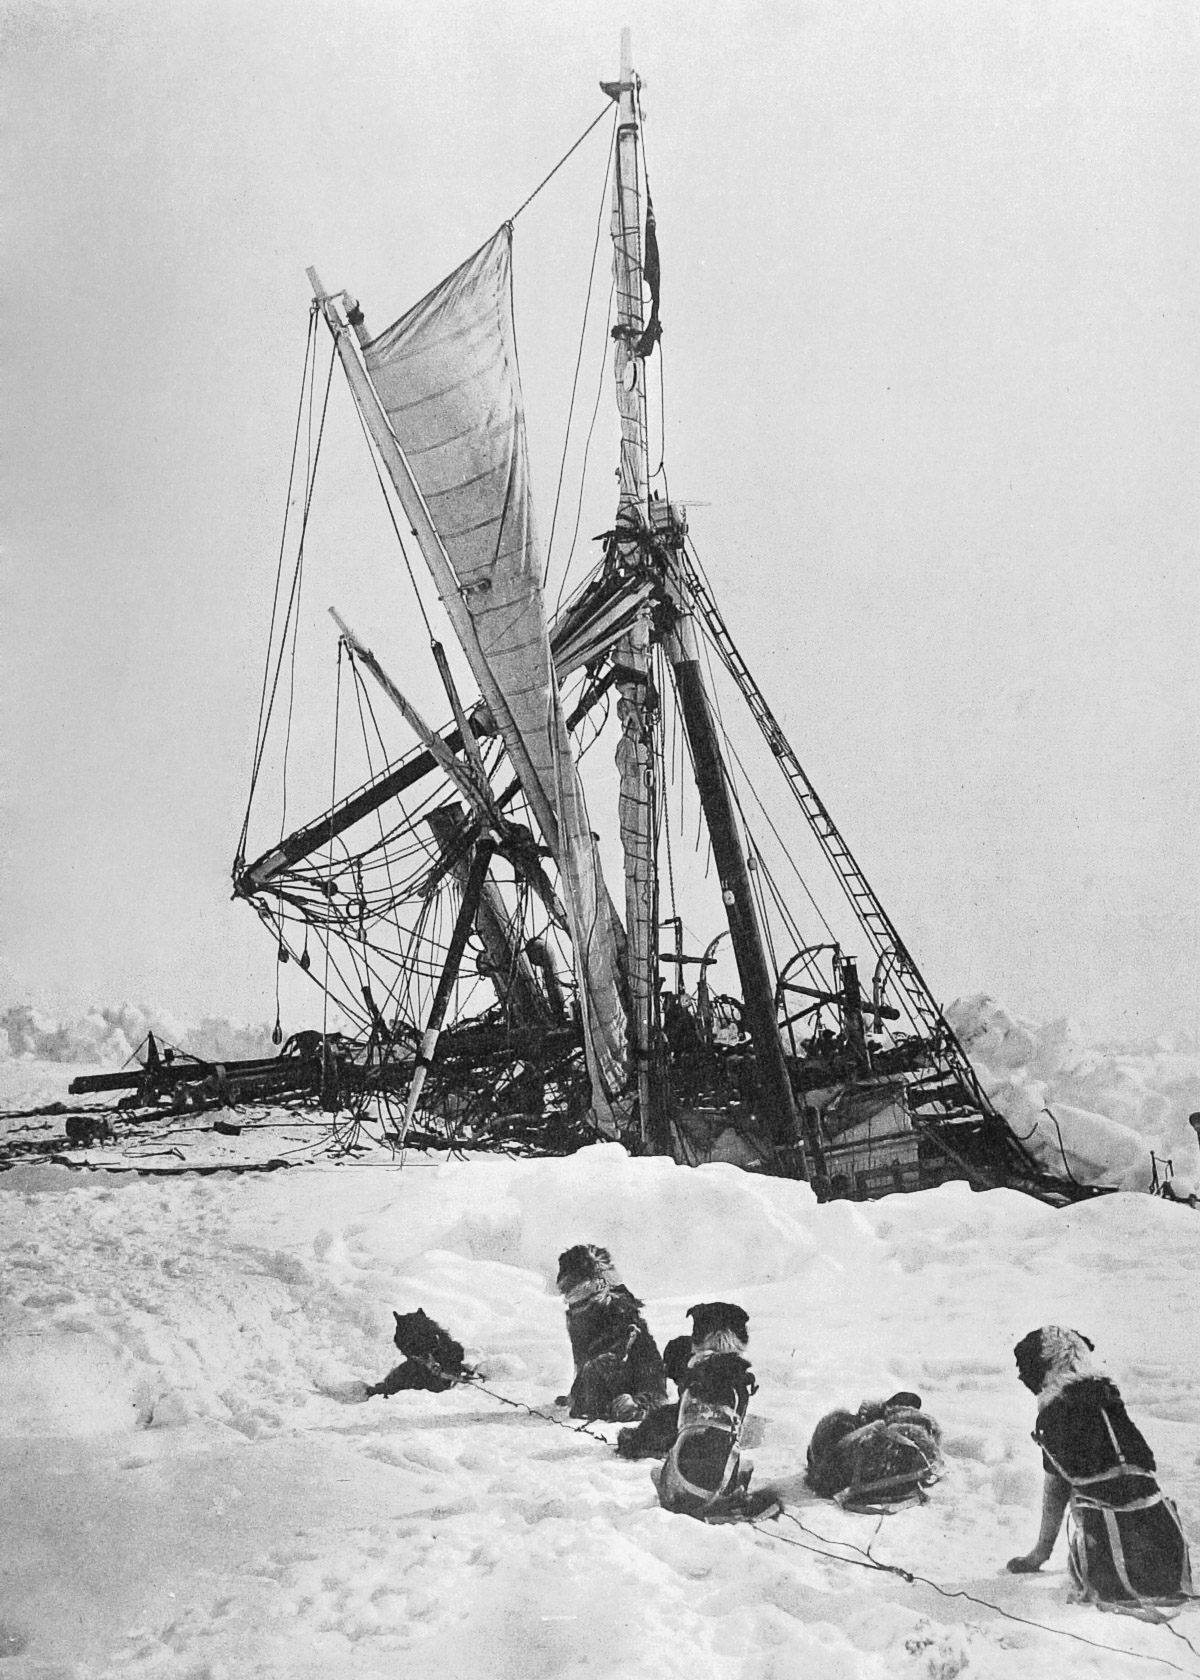 Antarctic Expedition To Find Ernest Shackleton’s Lost Ship Set For Next Year